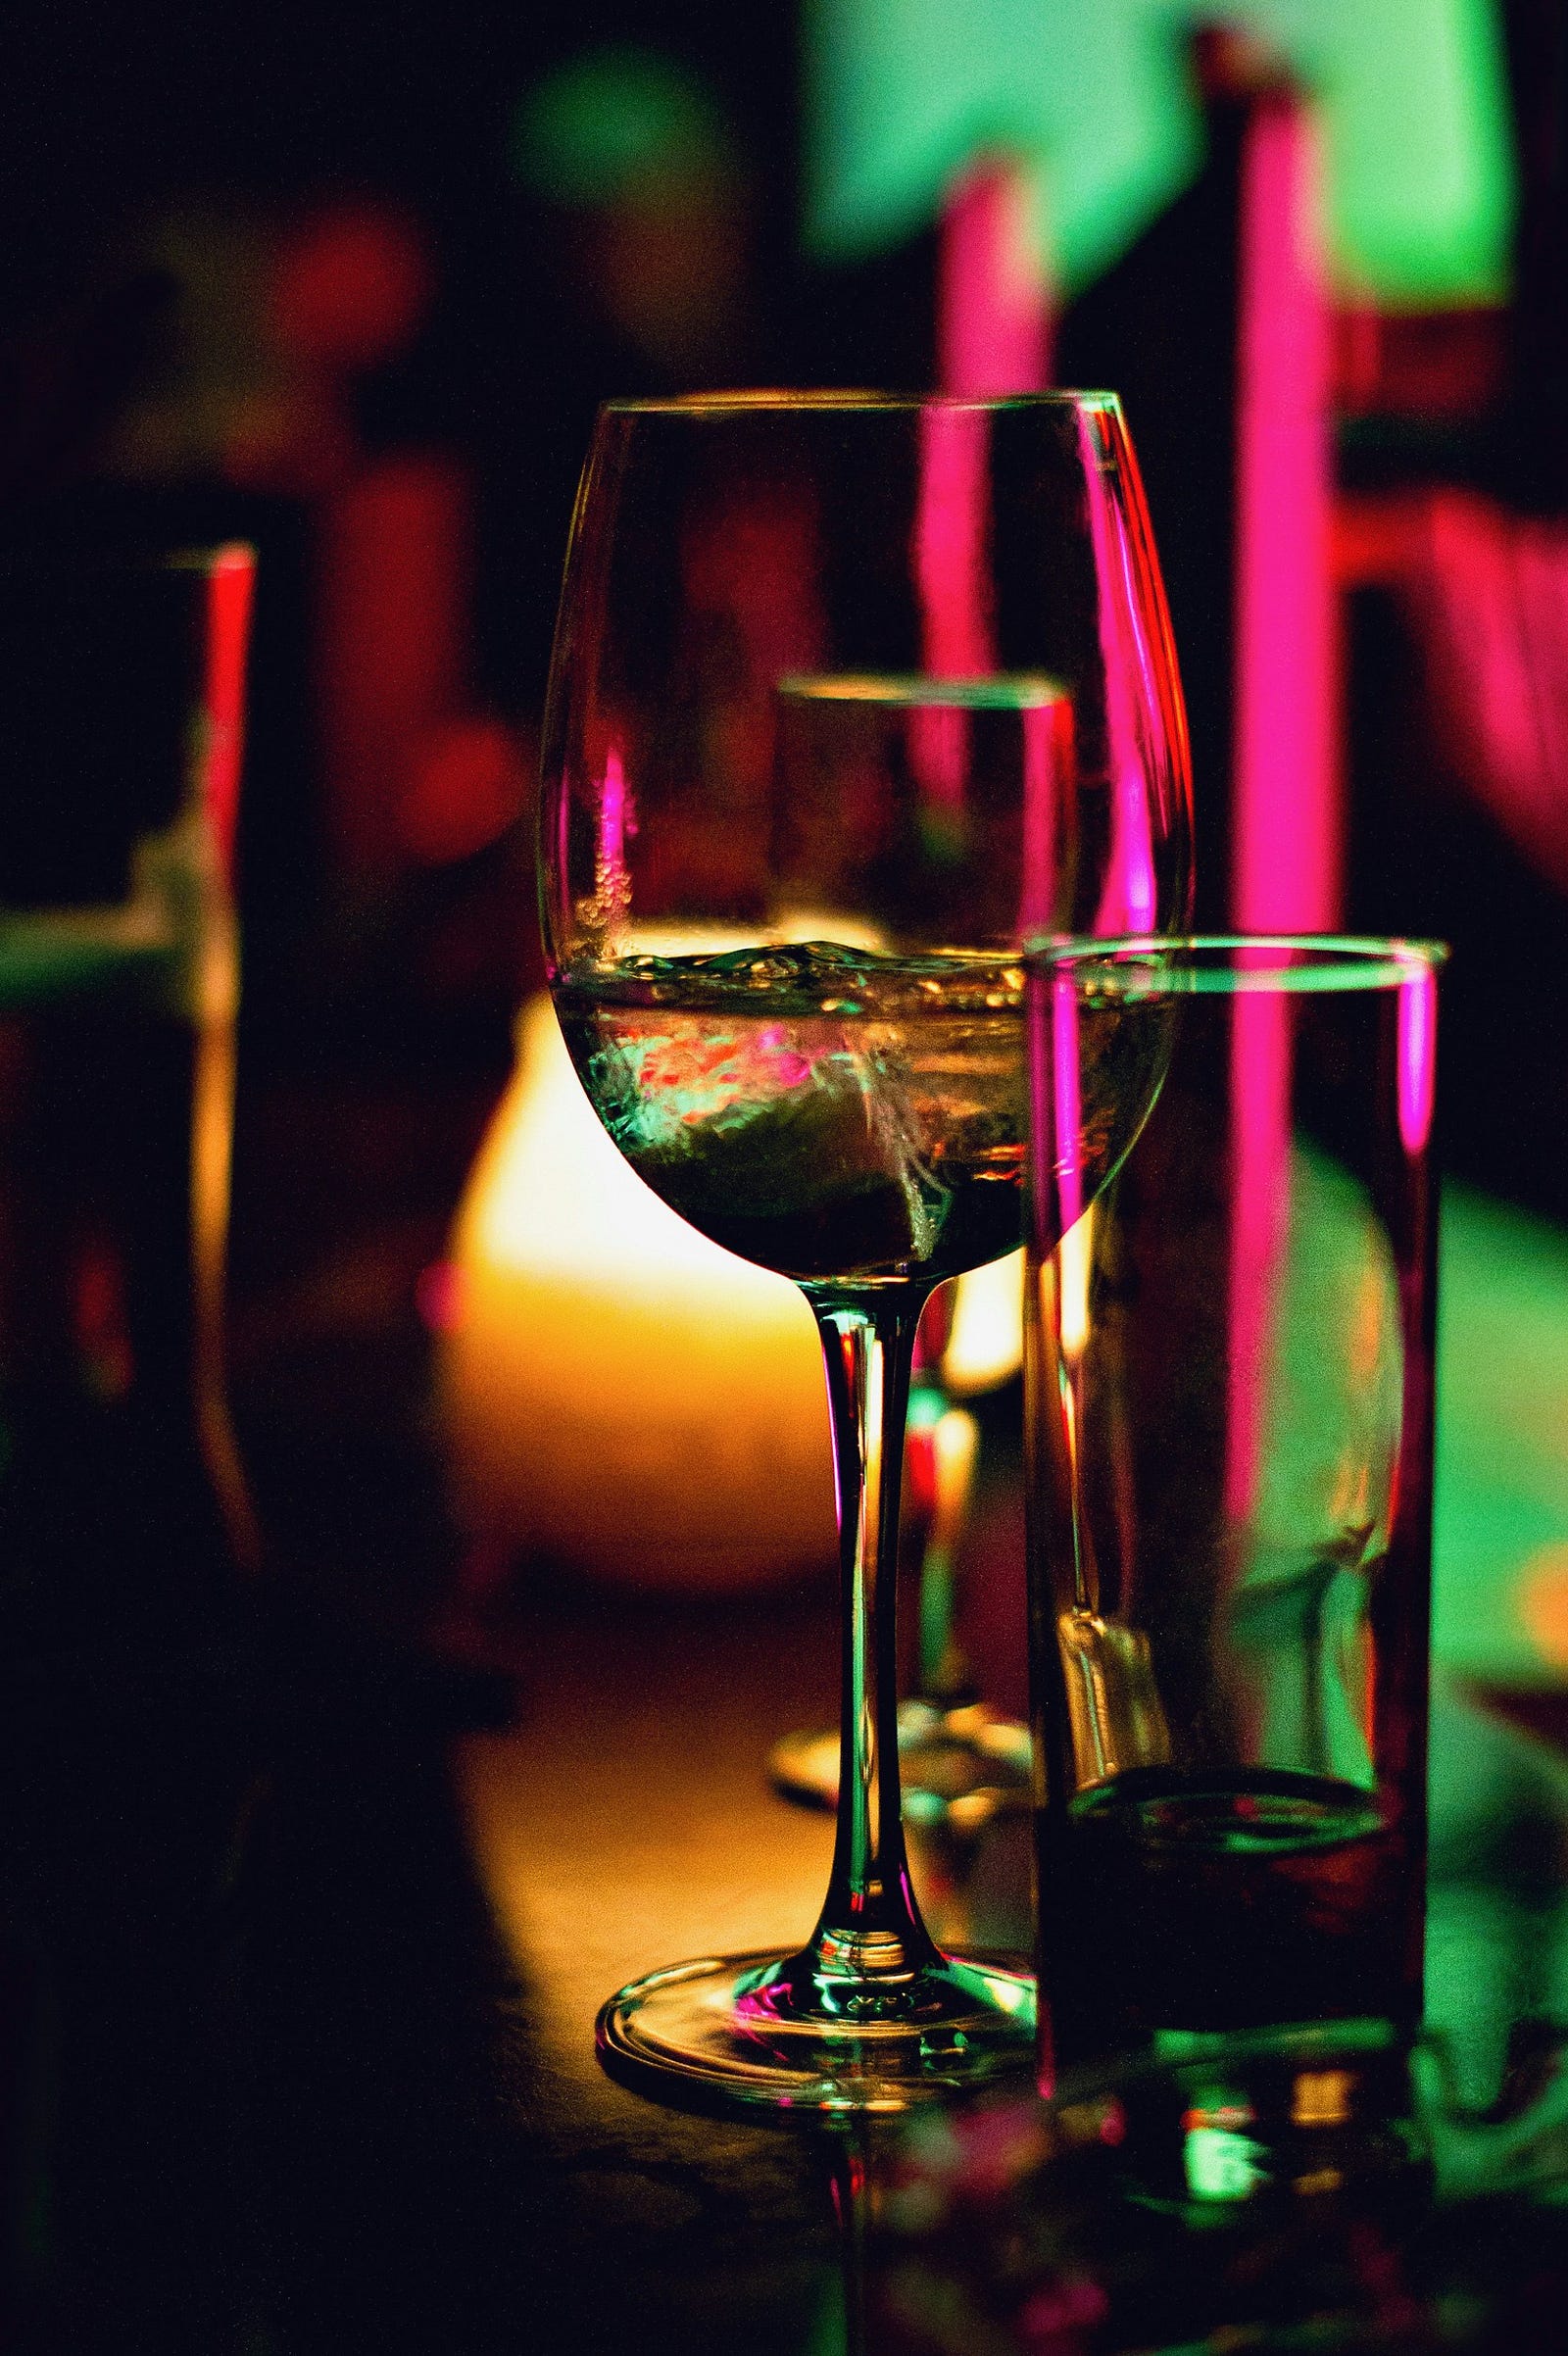 Two glasses of wine. Excessive wine consumption can harm cognitive functioning.